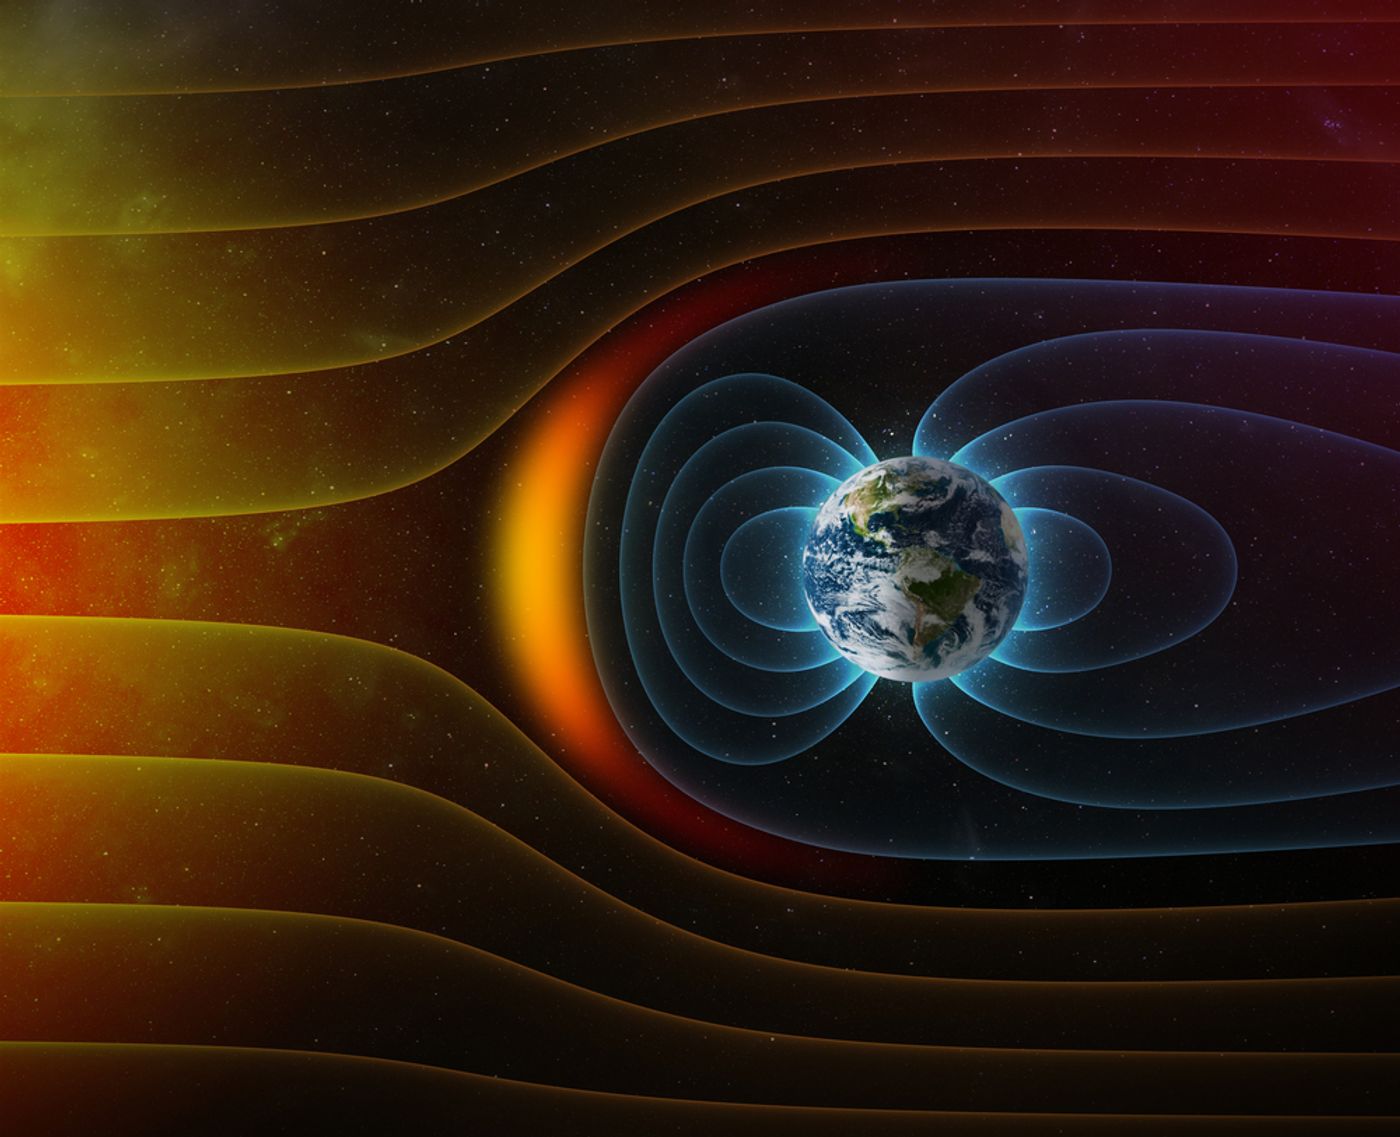 Earth's magnetic field shields the planet from solar wind emanated by the Sun.